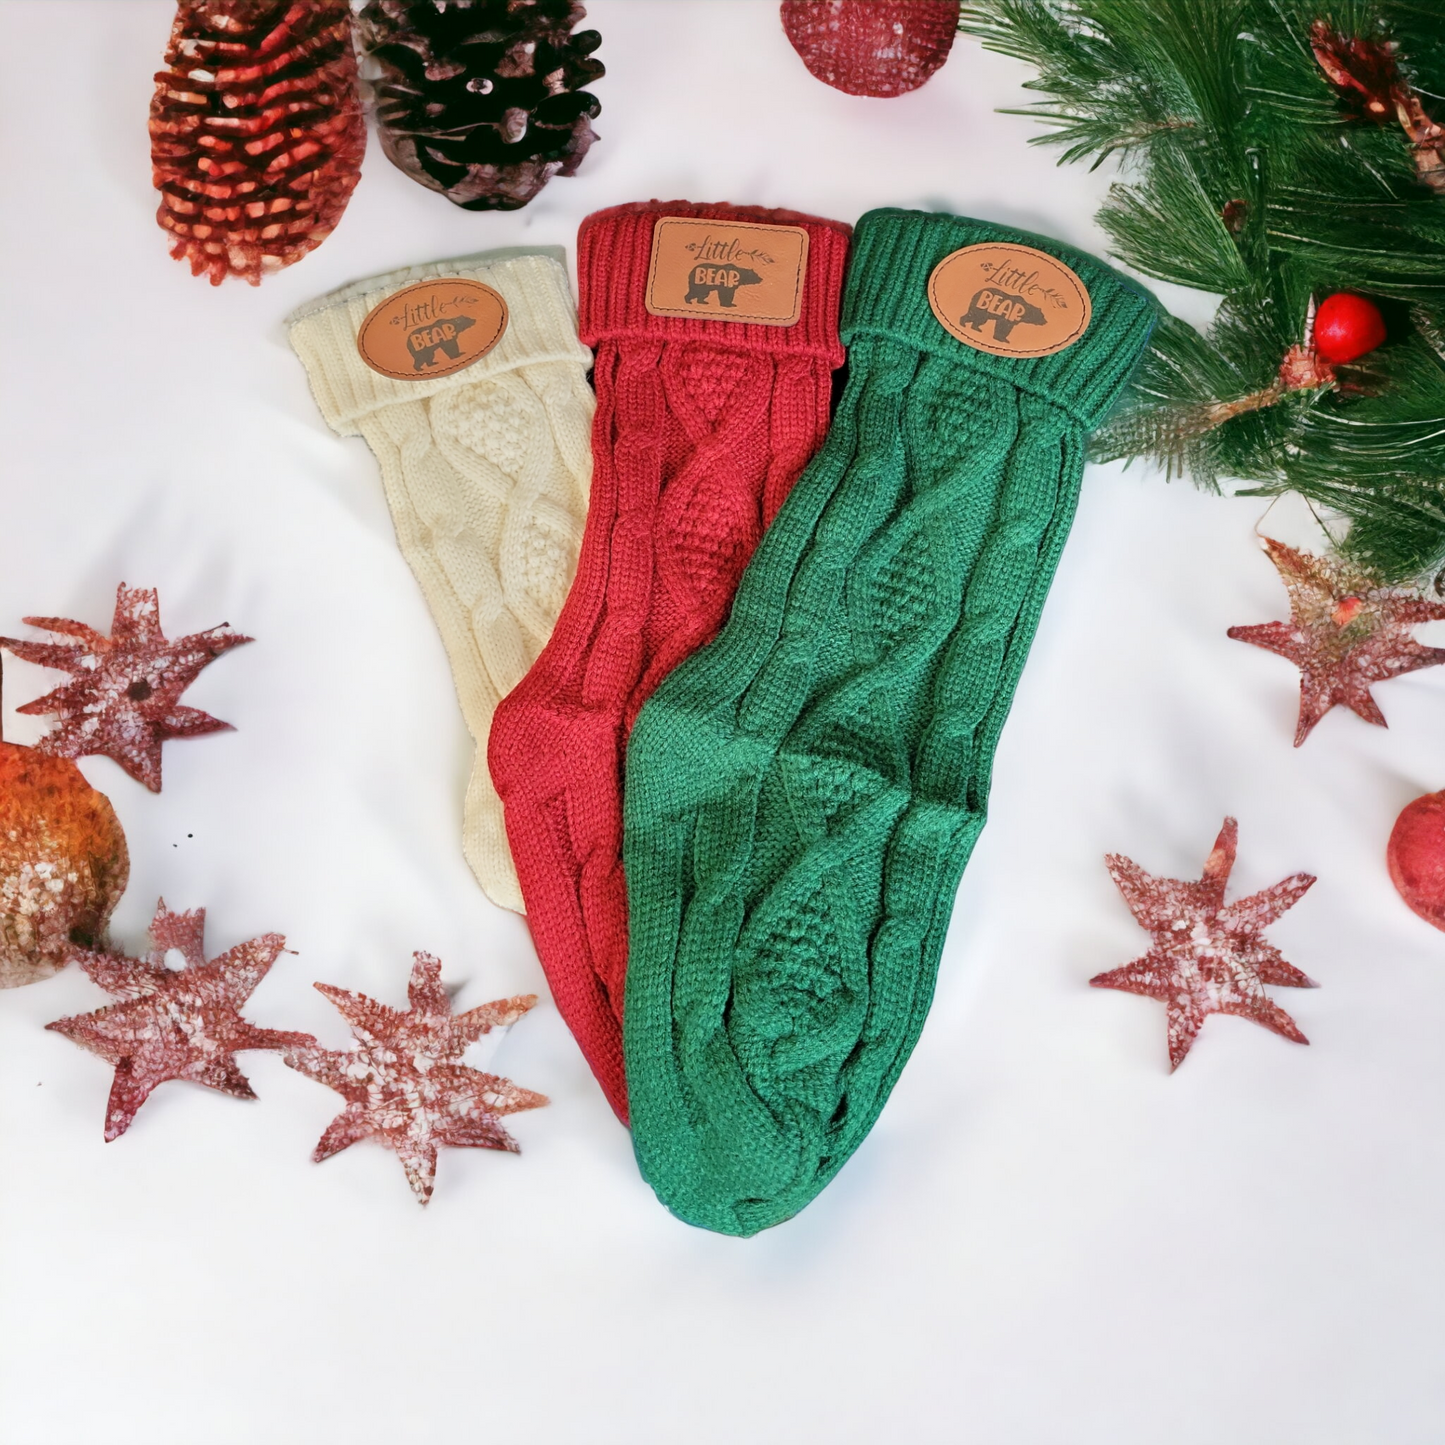 Christmas Stockings - 3 Colors to Choose From